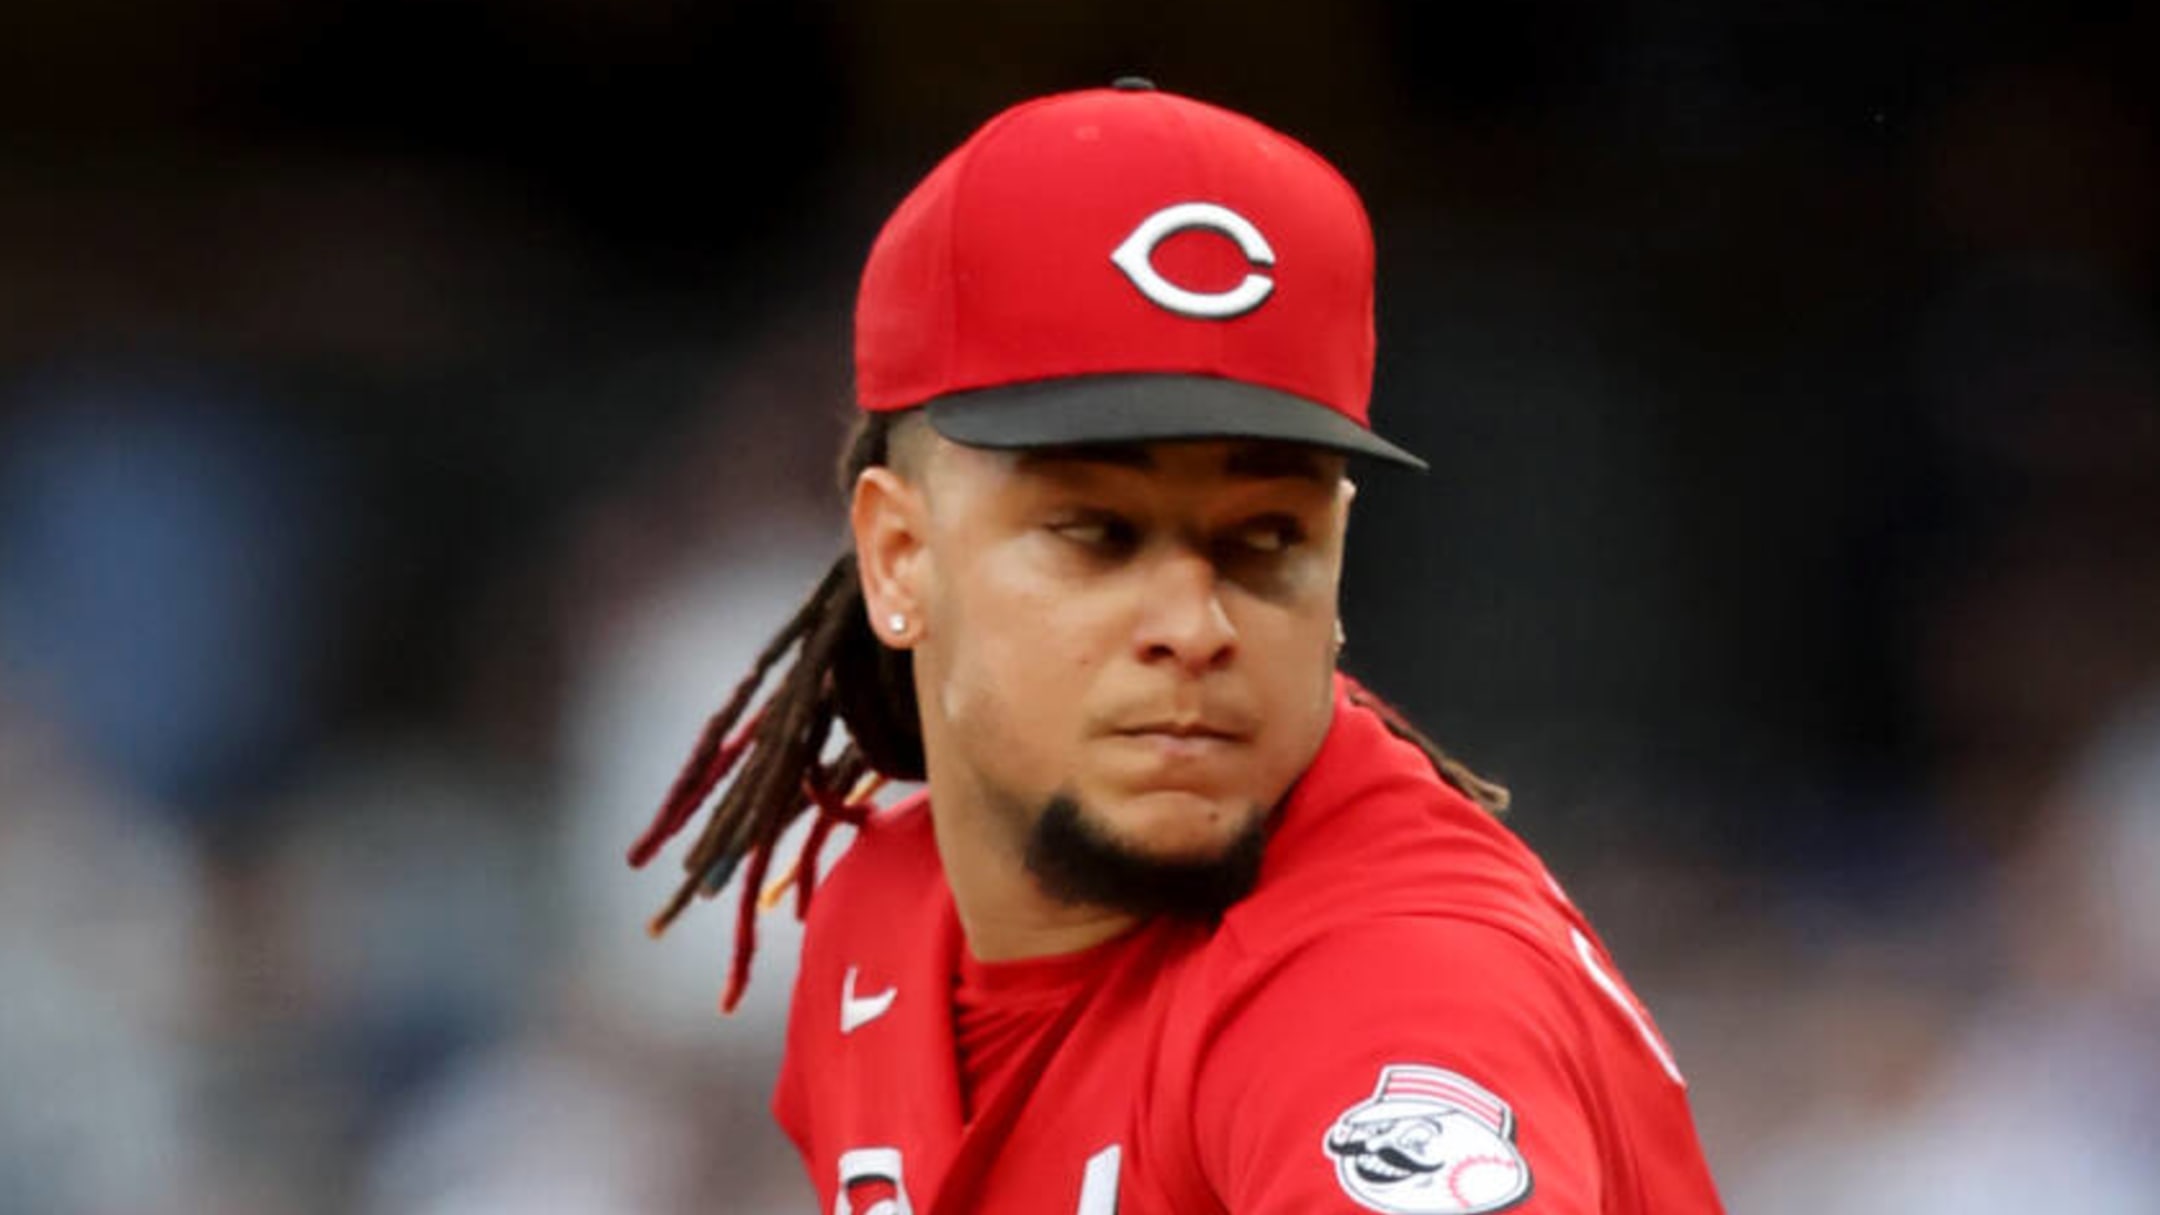 Breaking Down the Luis Castillo Trade Return For the Reds